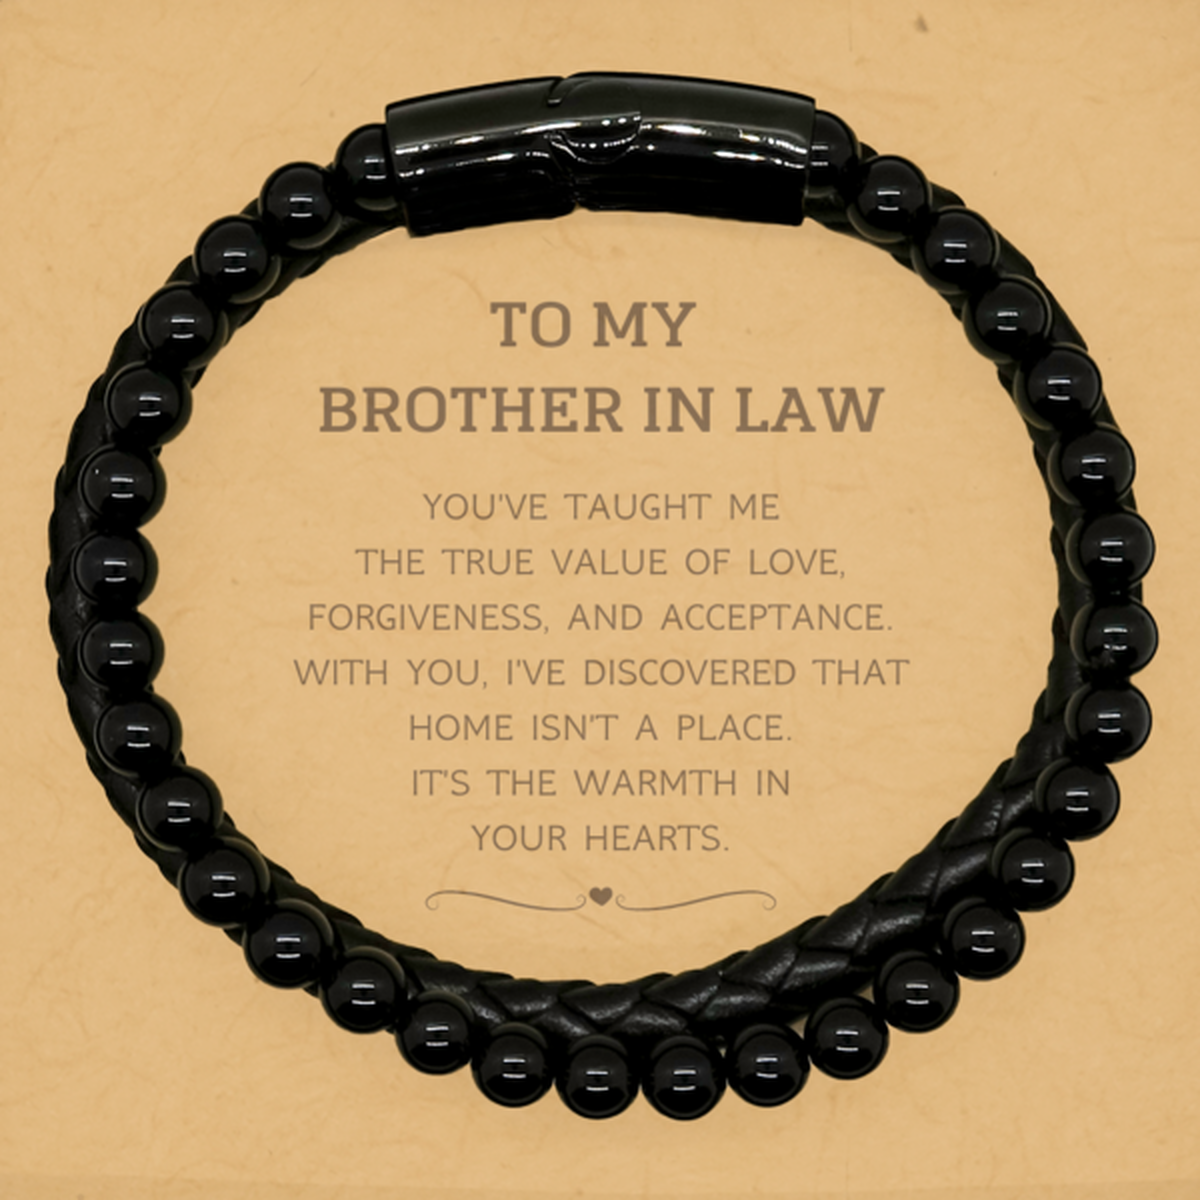 To My Brother In Law Gifts, You've taught me the true value of love, Thank You Gifts For Brother In Law, Birthday Stone Leather Bracelets For Brother In Law